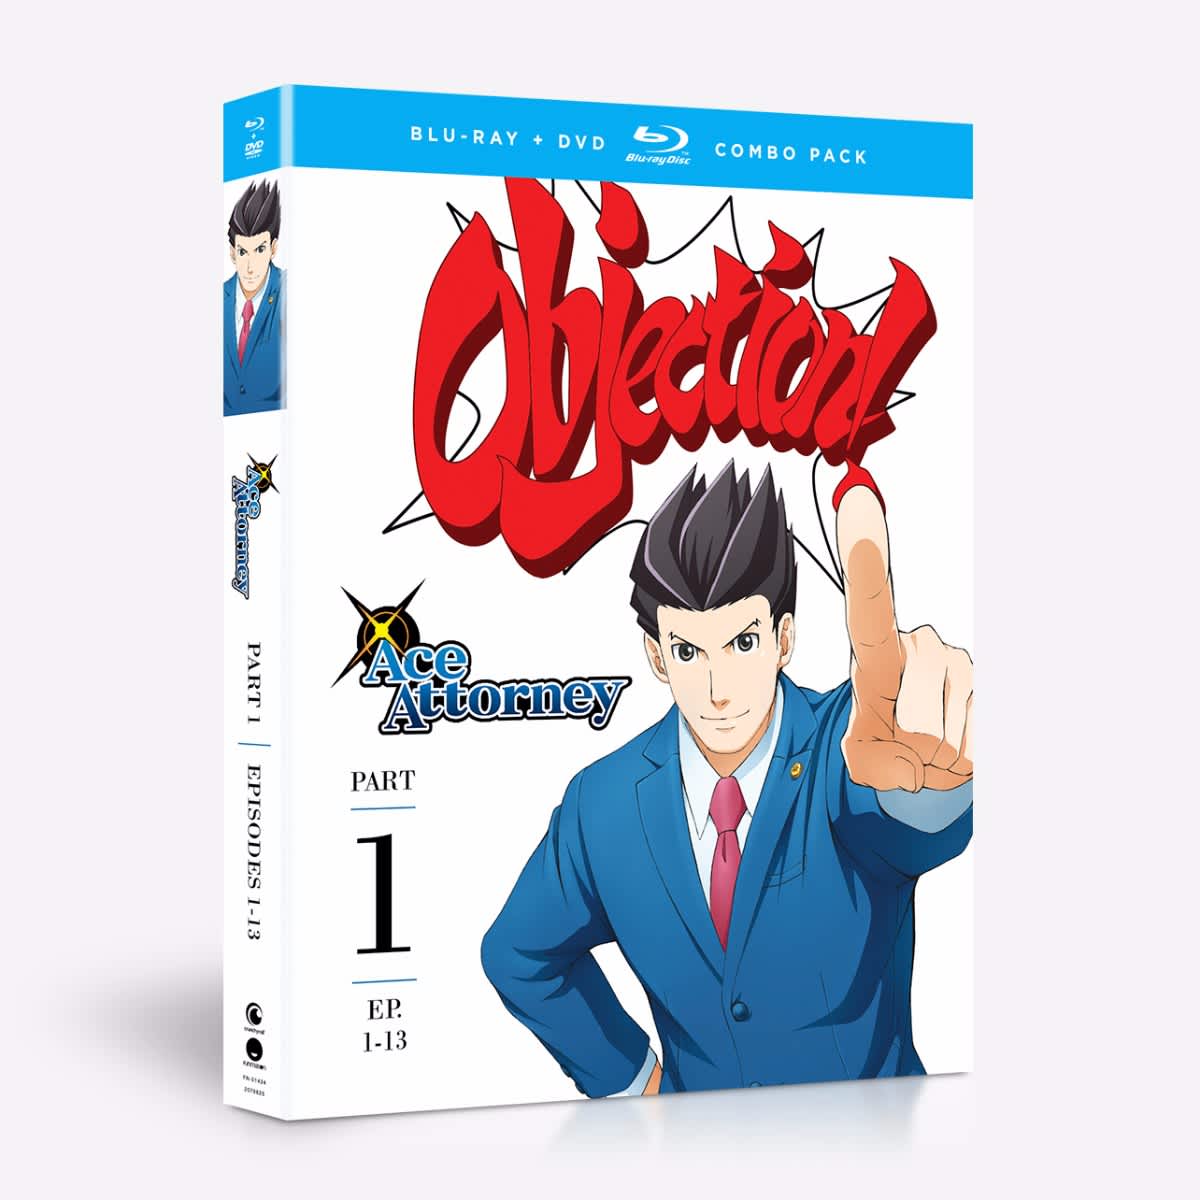 Ace Attorney - Part 1 - Blu-ray + DVD image count 0